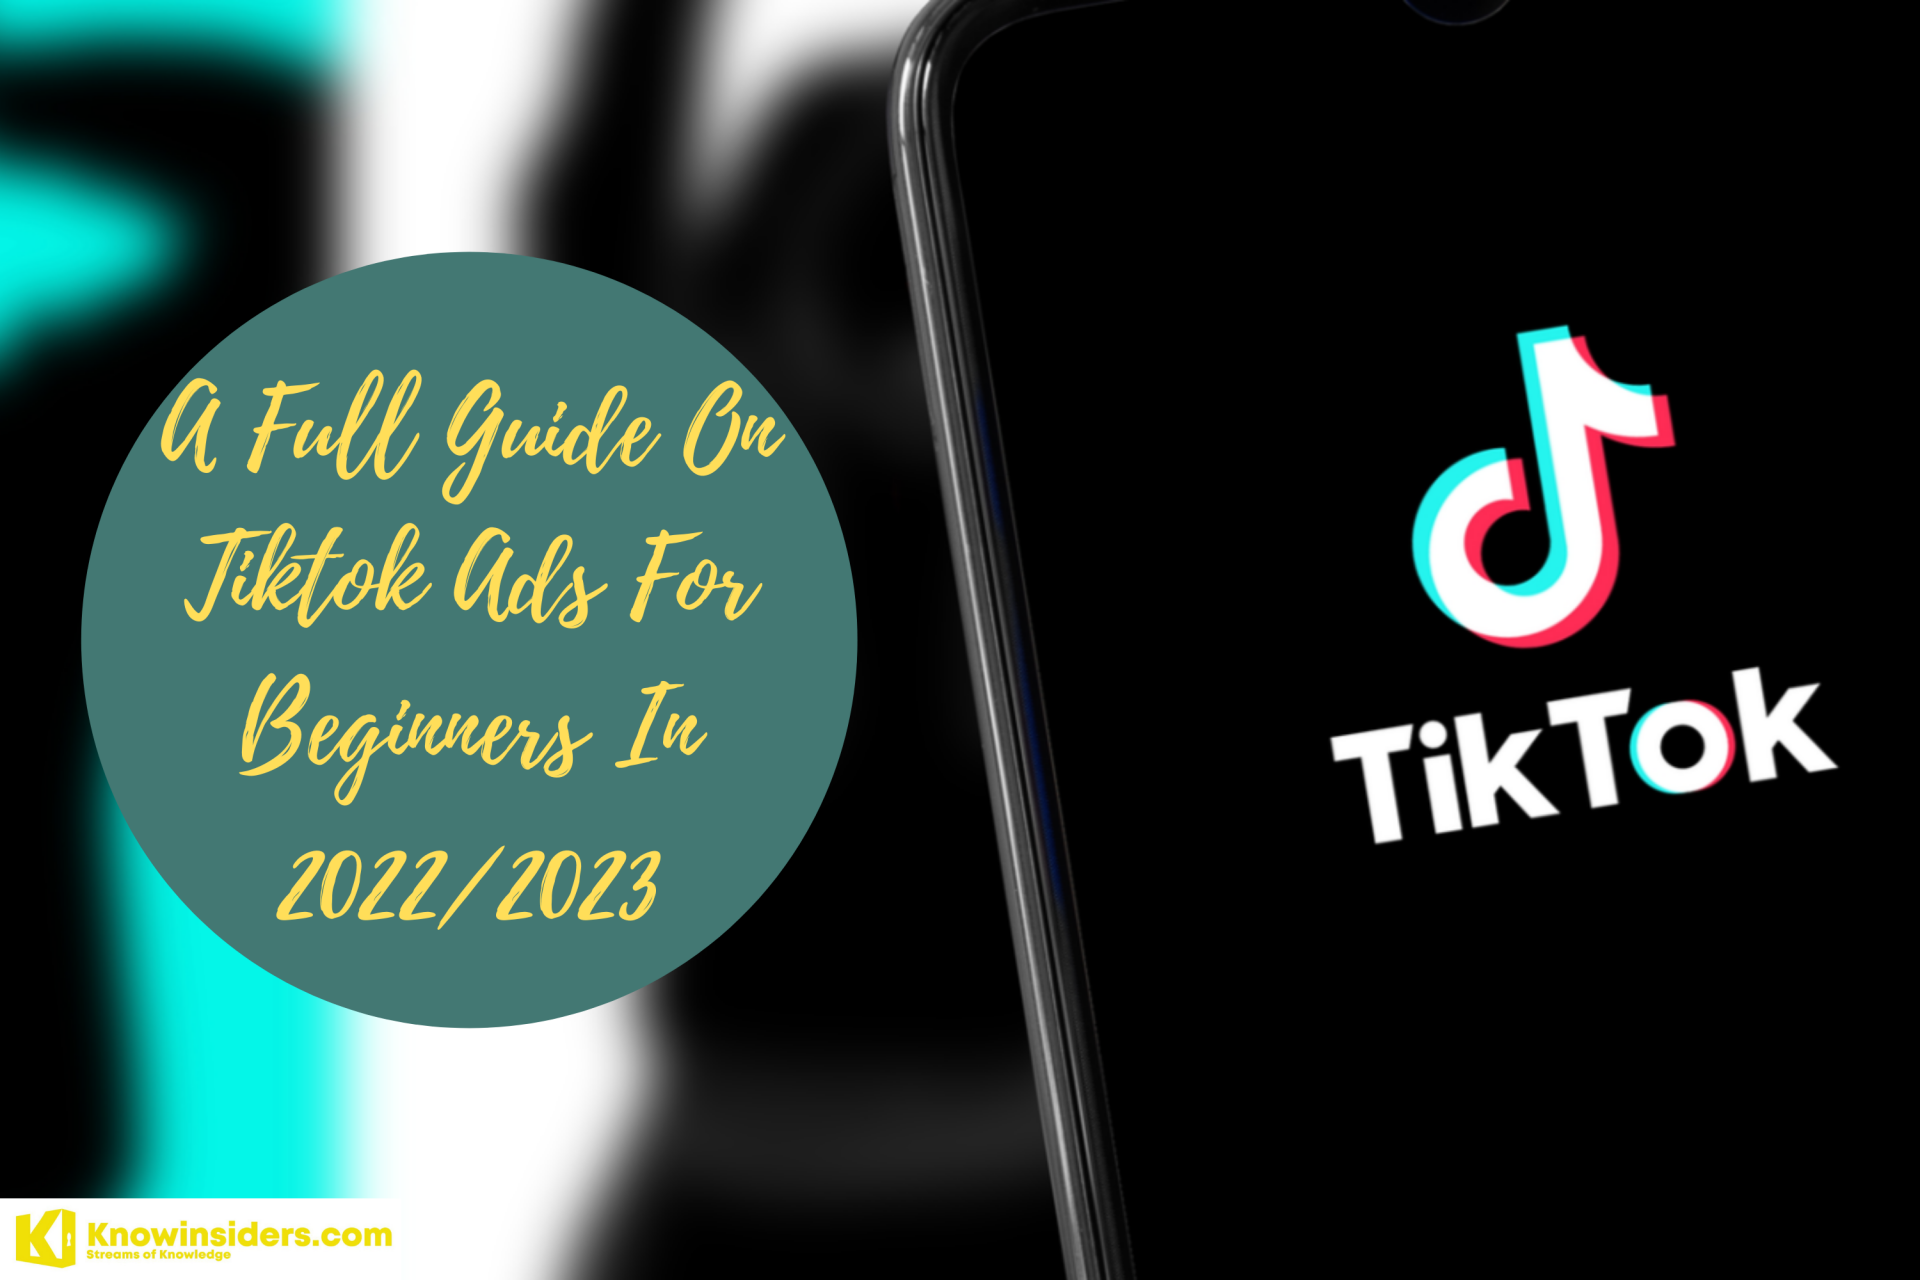 A Full Guide on Tiktok Ads For Beginners In 2022/2023 - Simple Steps